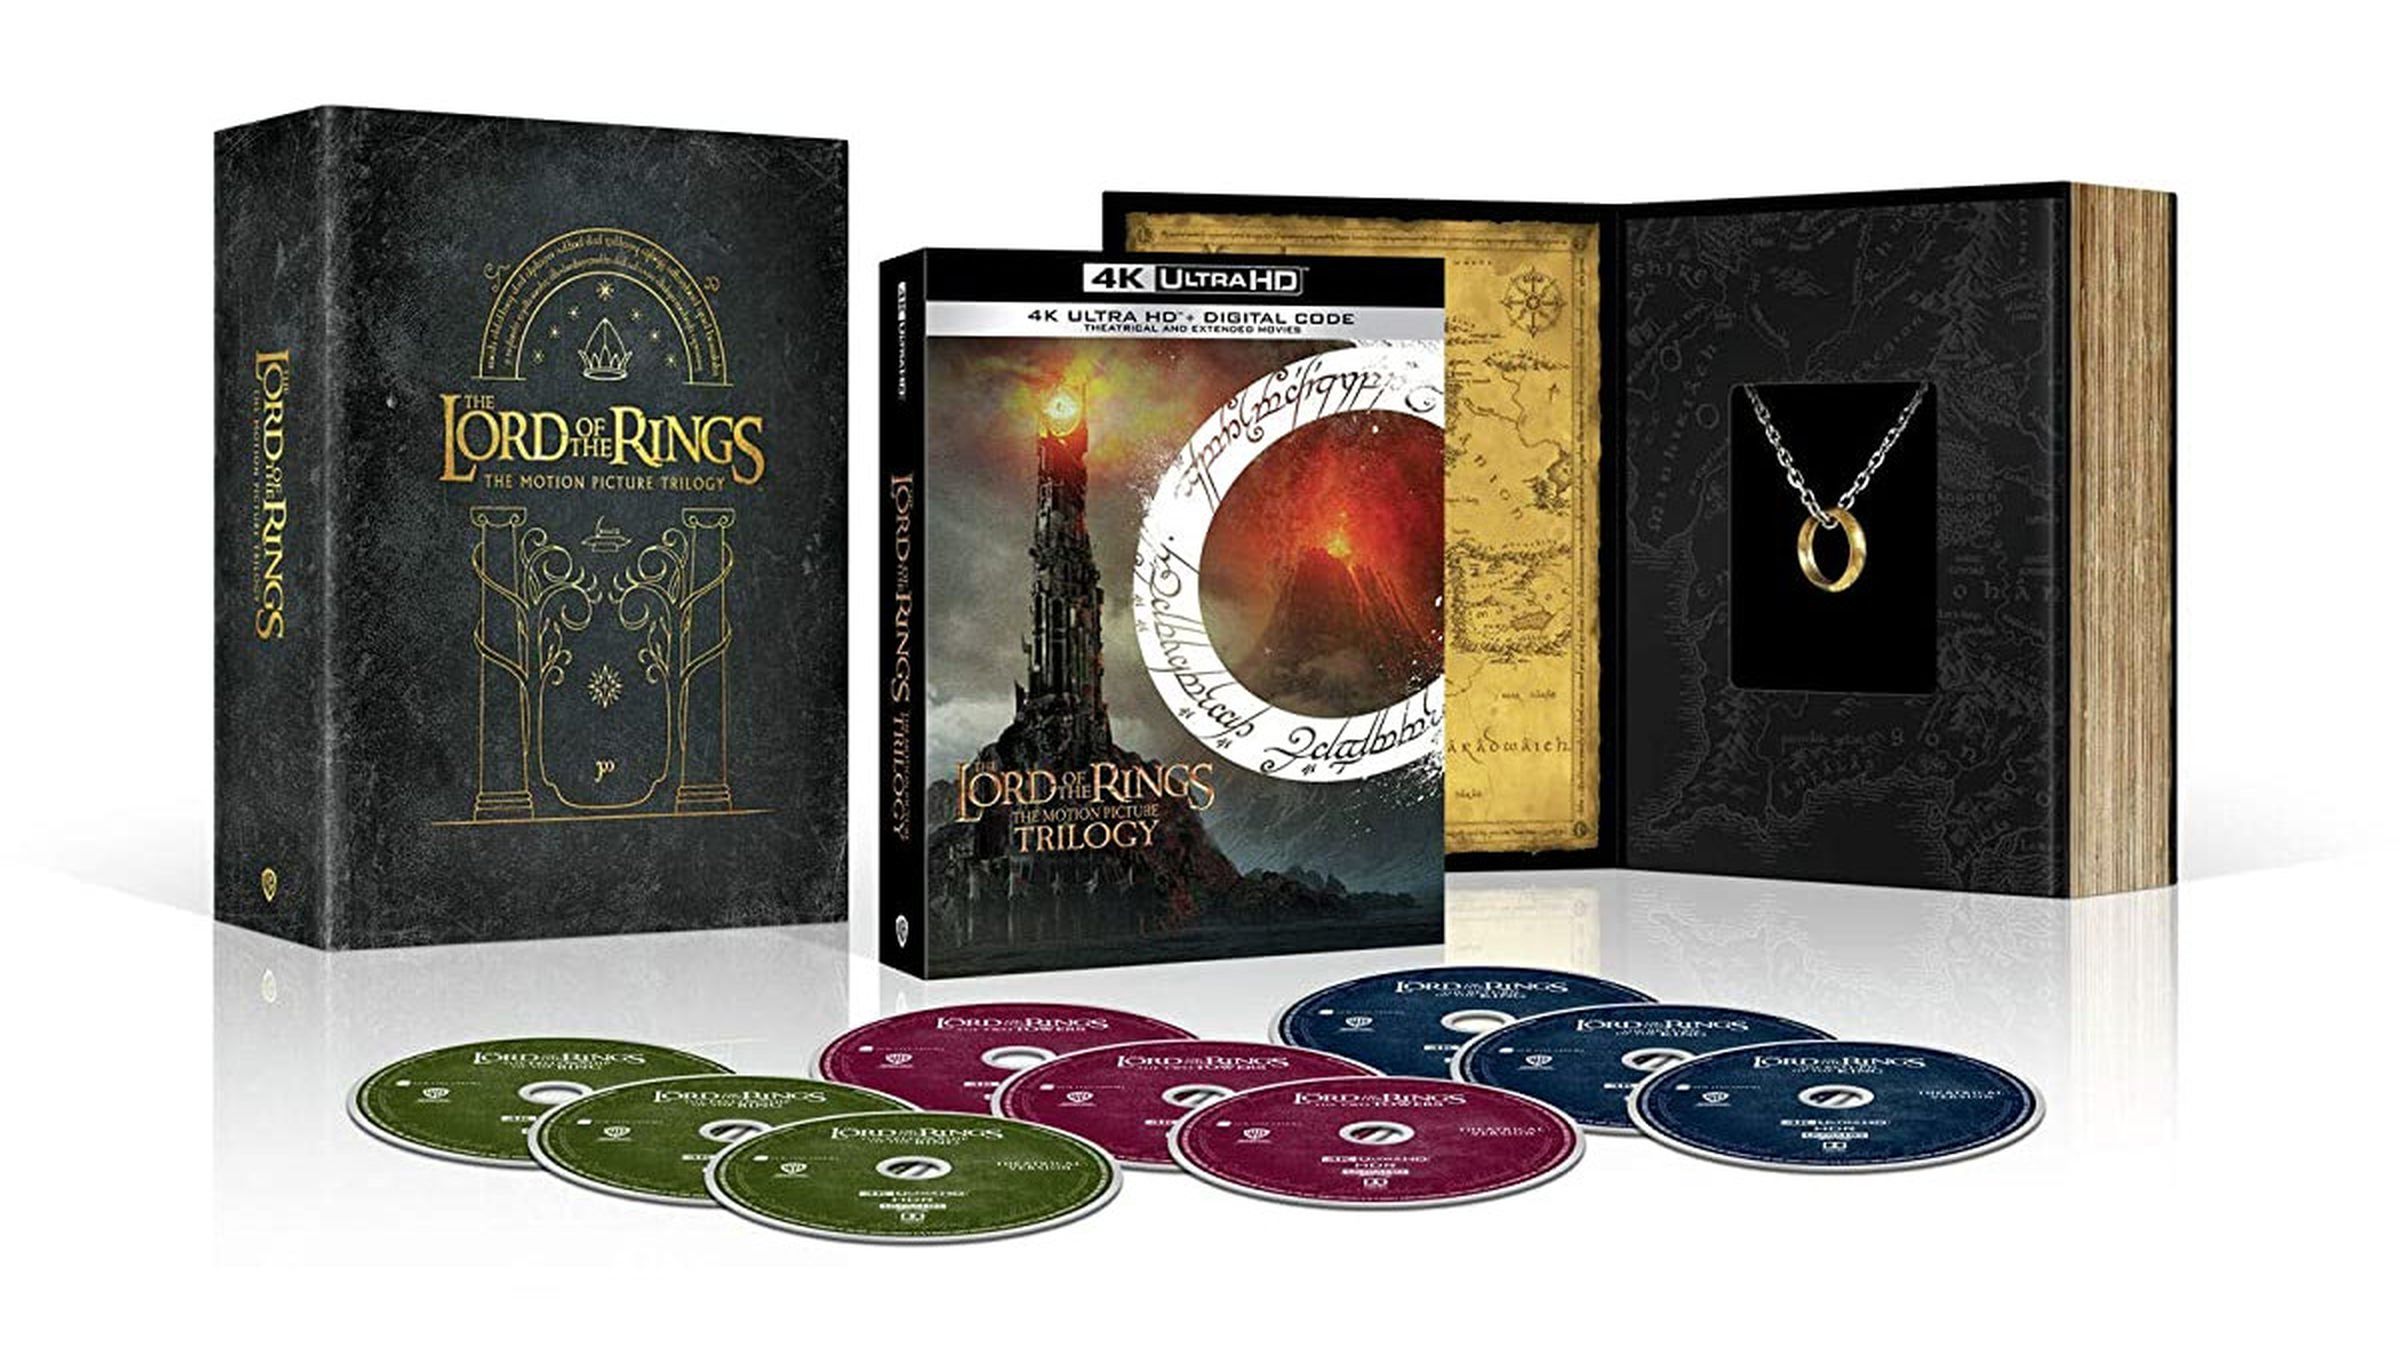 The giftset version of the 4K UHD remaster of The Lord of the Rings trilogy includes nine discs. 